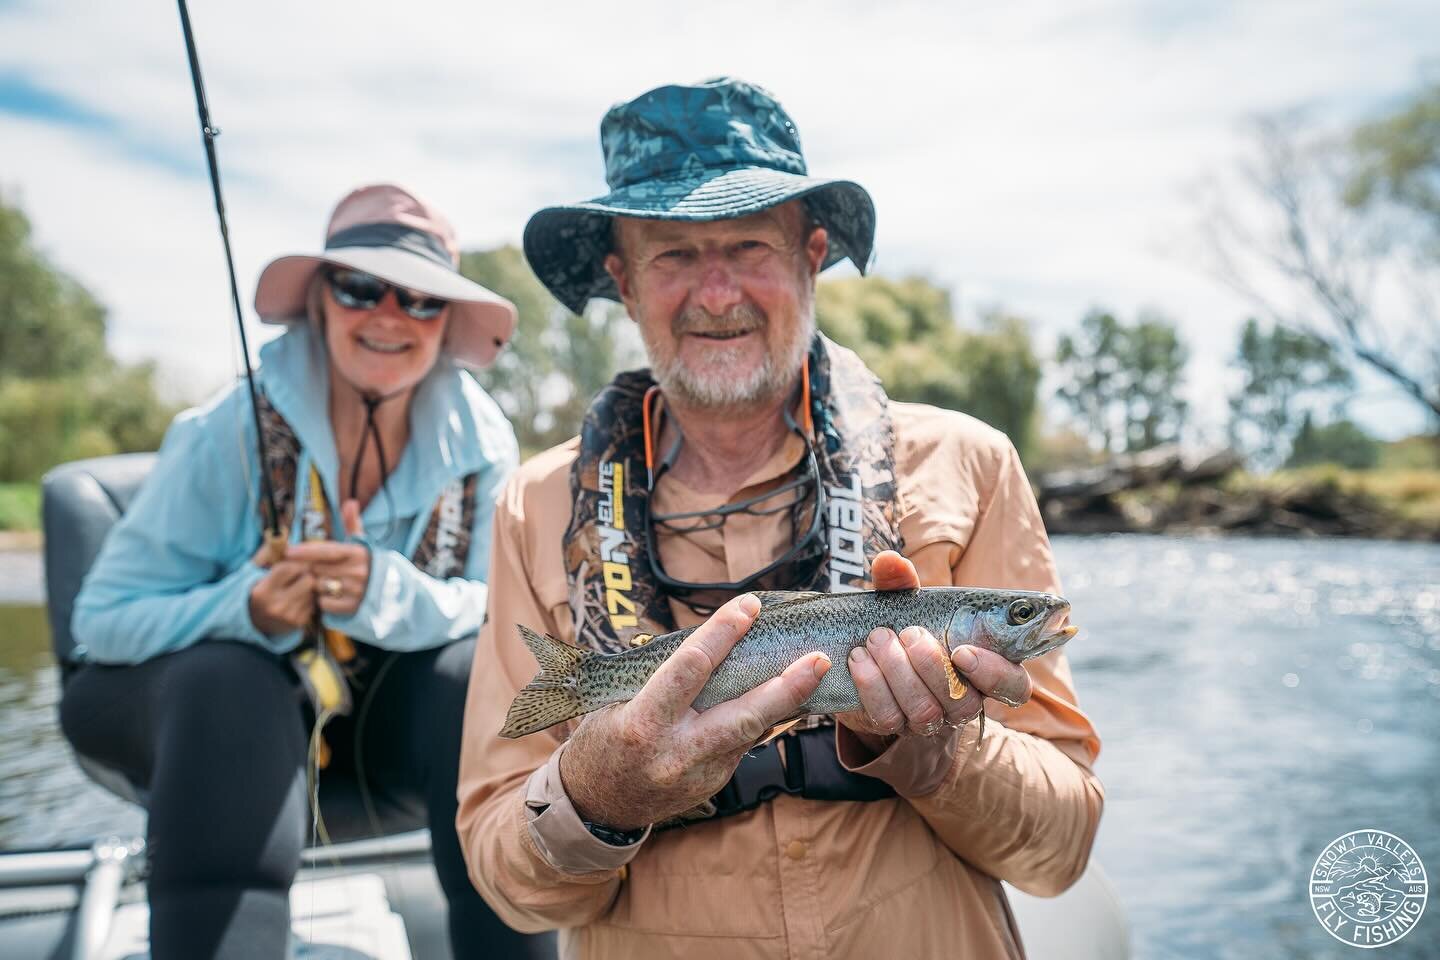 Drifting down the Tumut River is a perfect introduction to Fly Fishing, just ask Tony and Janelle who had a wonderful time while learning the fundamentals behind it all. 

Both did an amazing job on the water and it such a pleasure to spend time in g